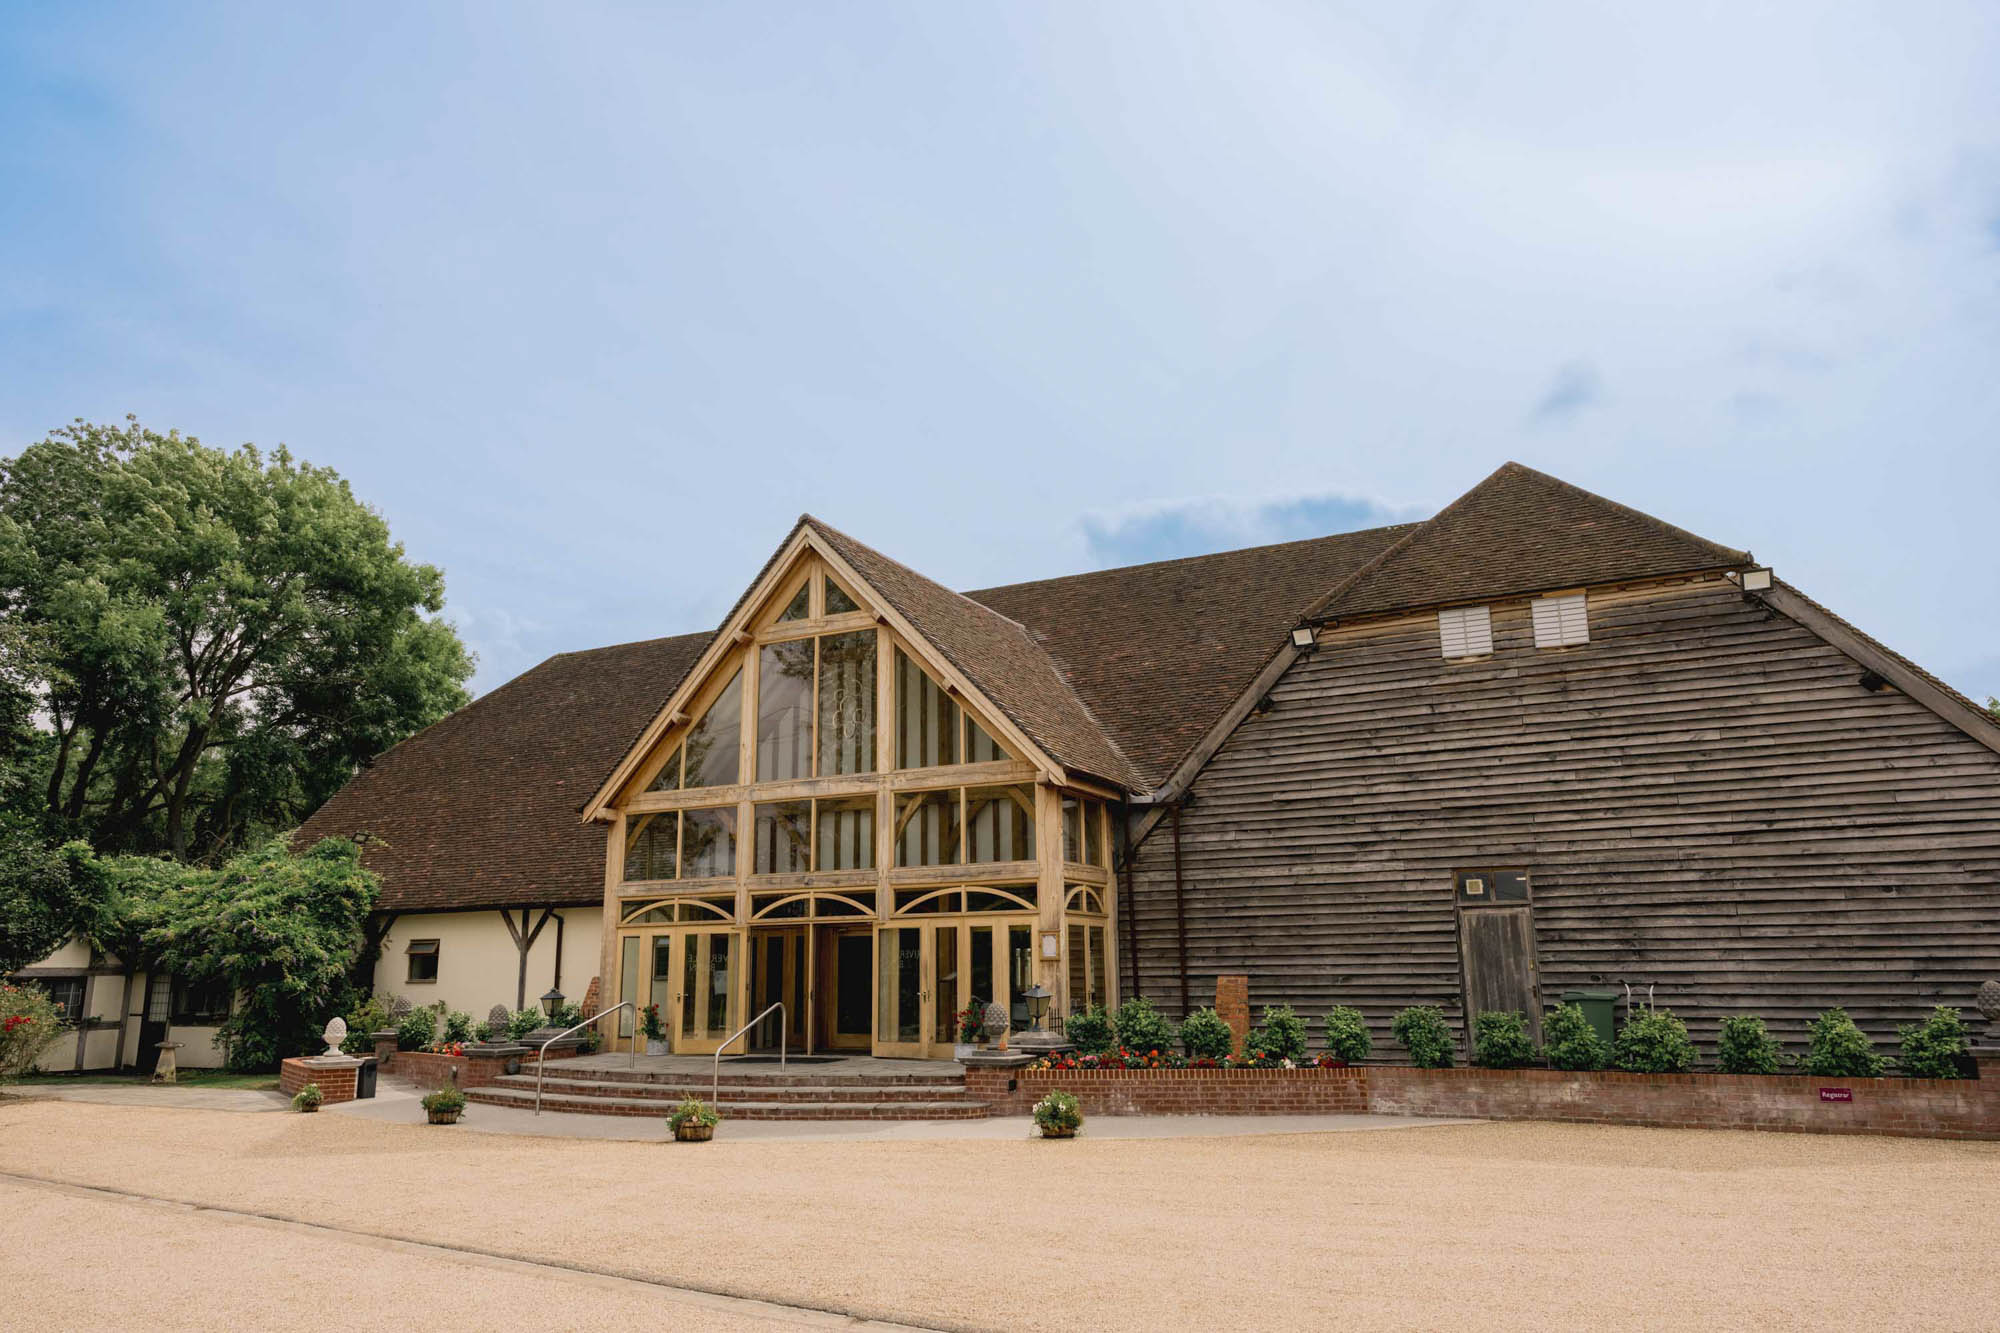 Rivervale Barn wedding venue in Hampshire on a sunny day.